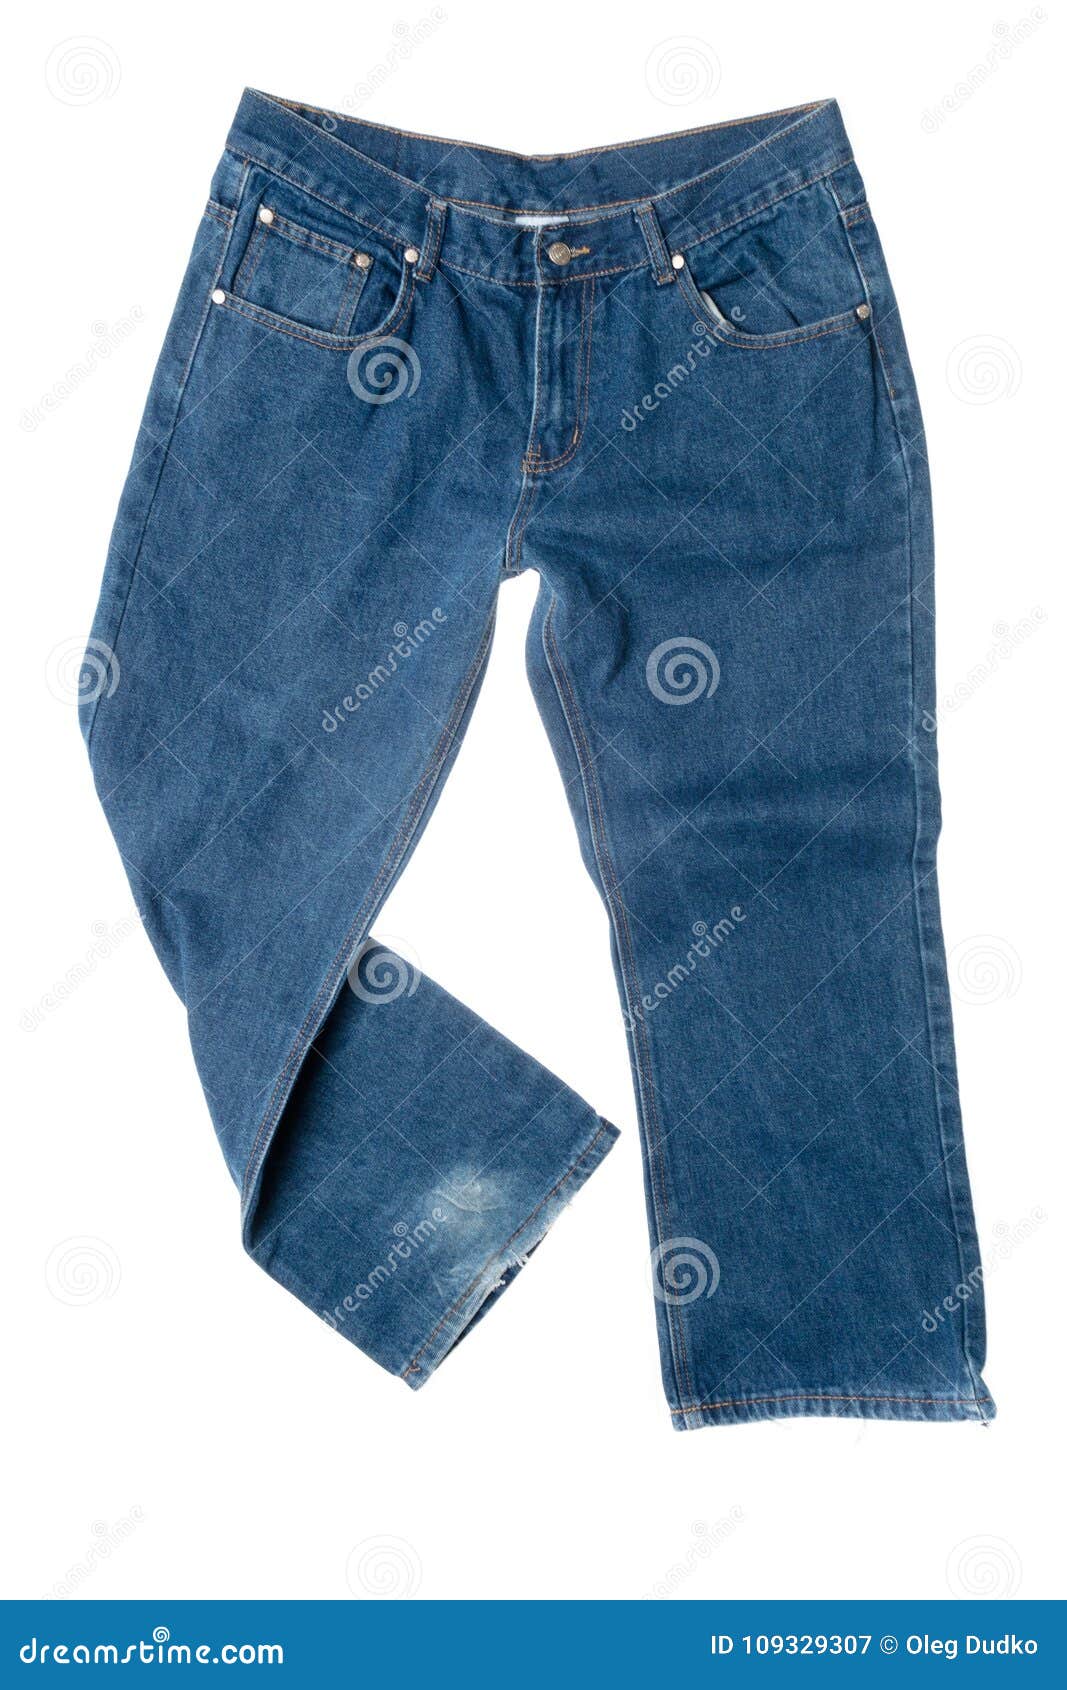 Blue Jeans Isolated on White Stock Image - Image of tapered, dress ...